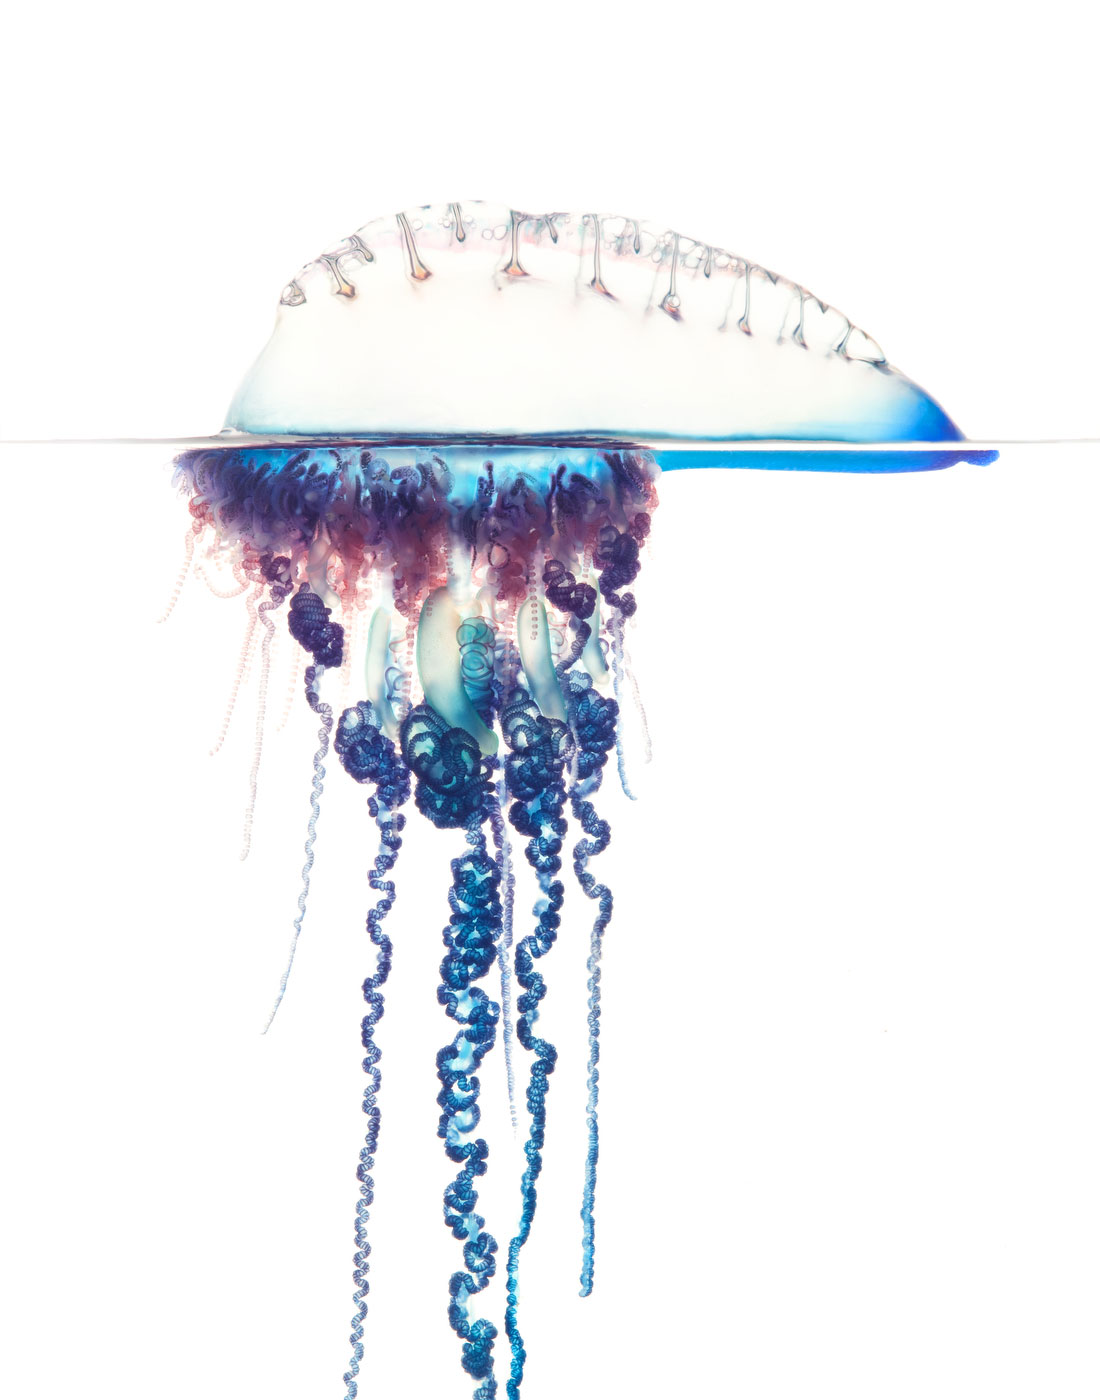 Portuguese Man-of-War (Physalia physalis) This image won 3rd place in Nature for the 2012 International Loupe Awards.